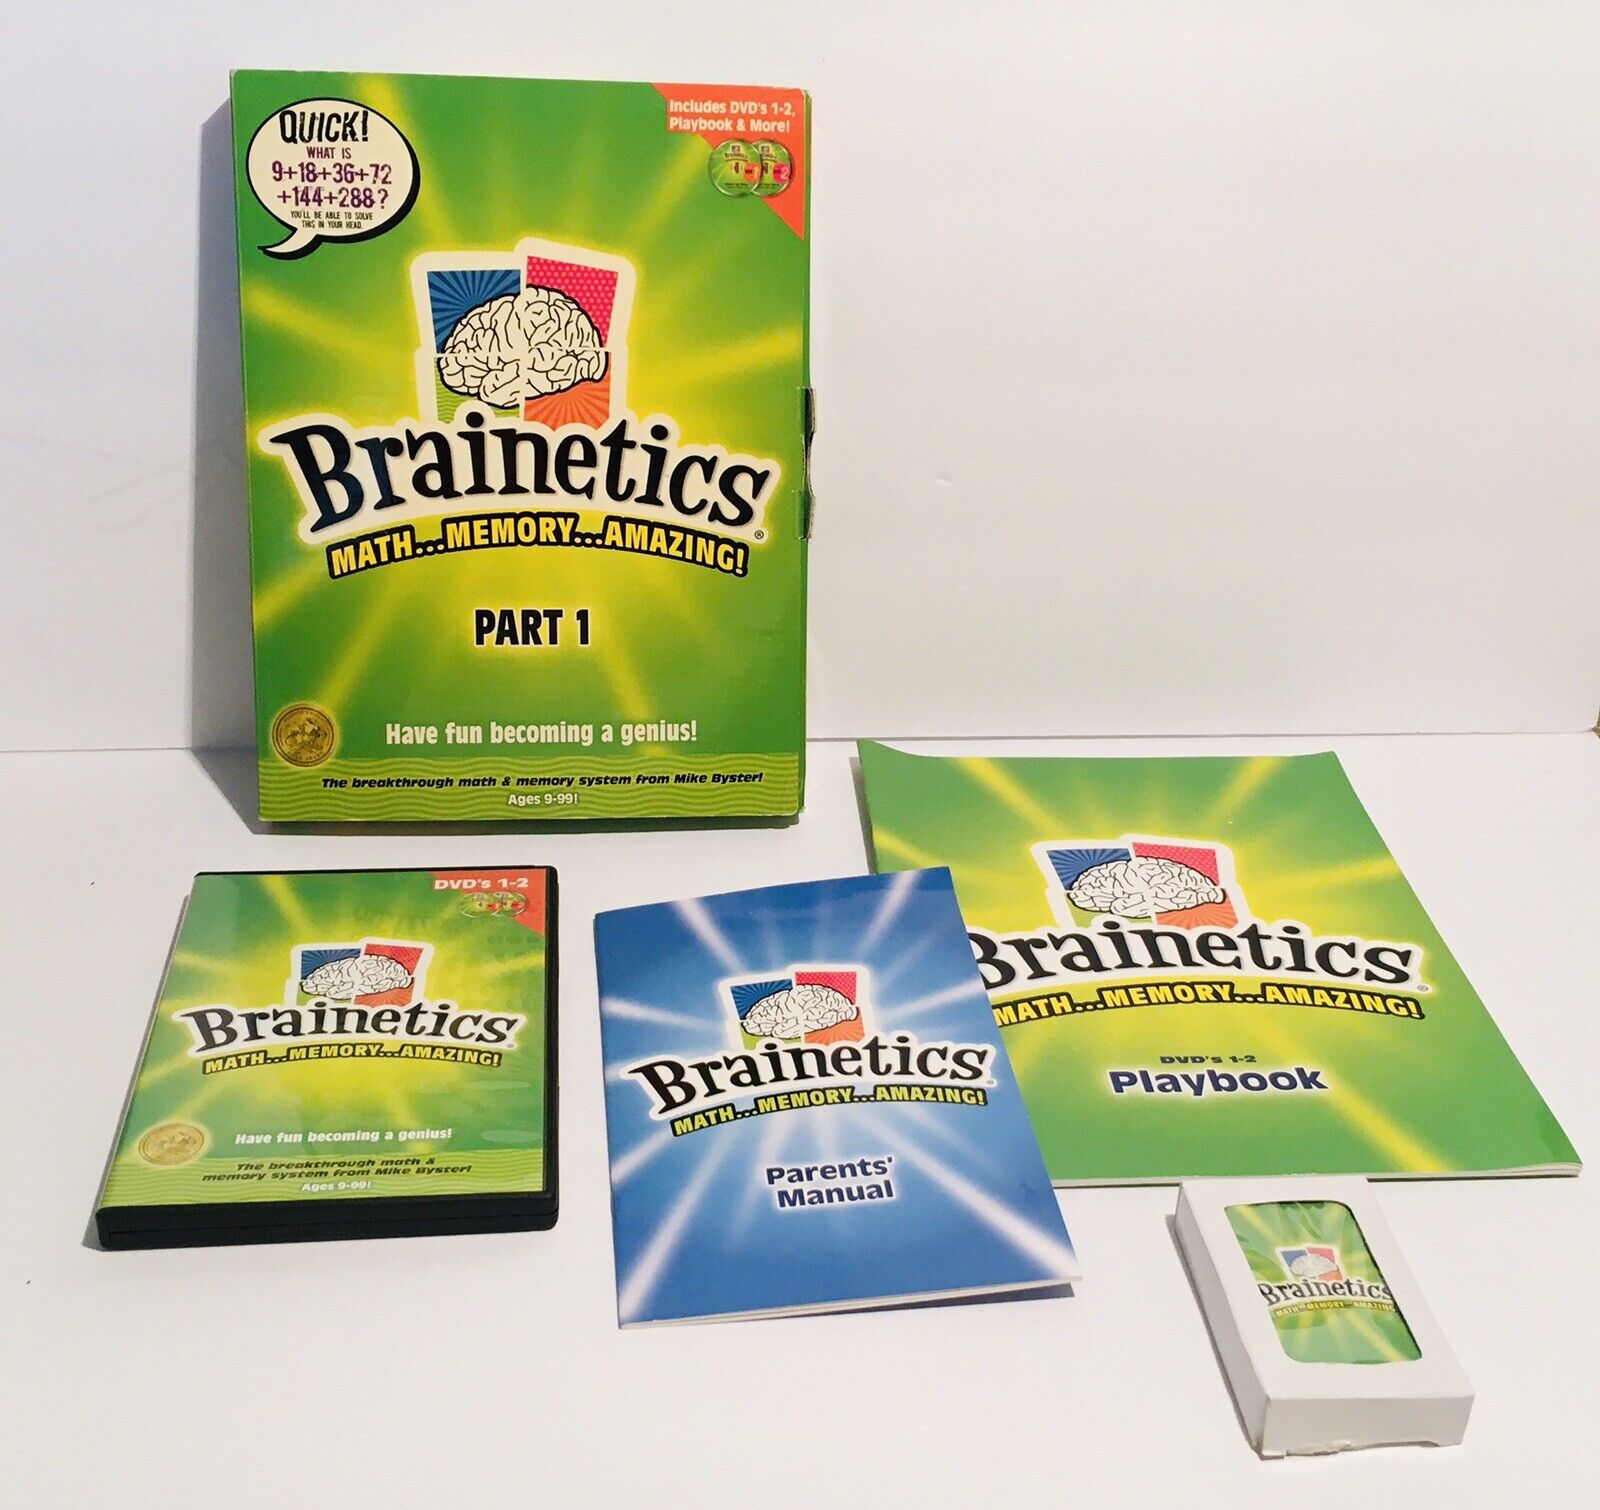 BRAINETICS PART 1: MATH MEMORY AMAZING DVD 1 & 2 with Playbook Become a Genius